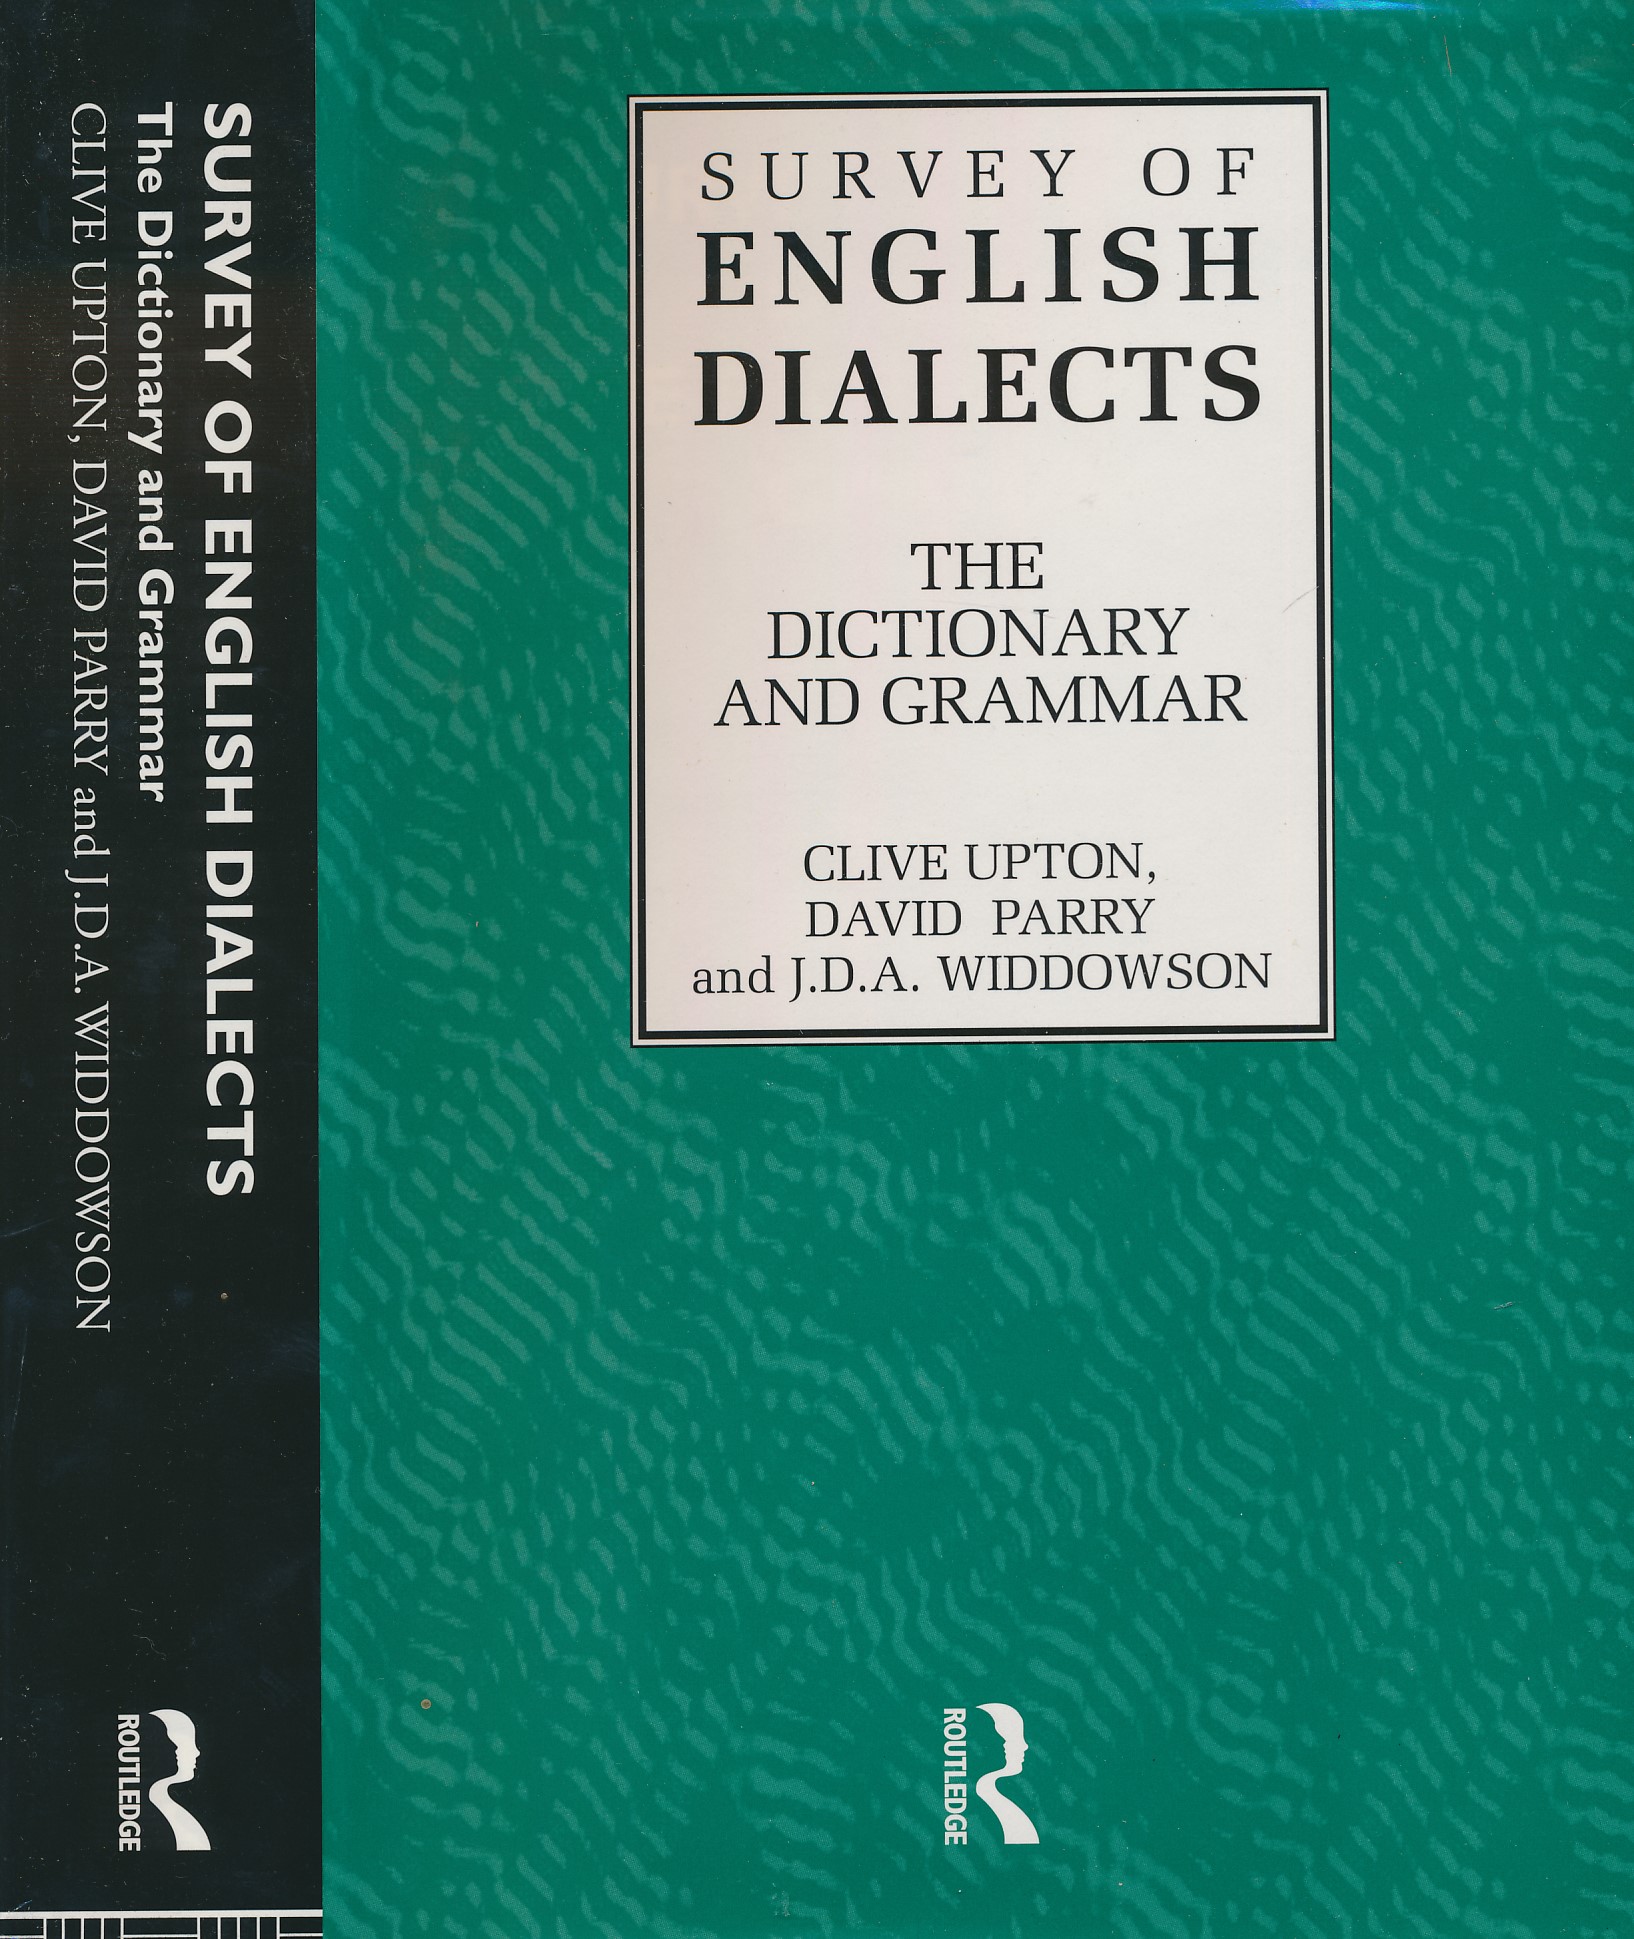 Survey of English Dialects: The Dictionary and Grammar